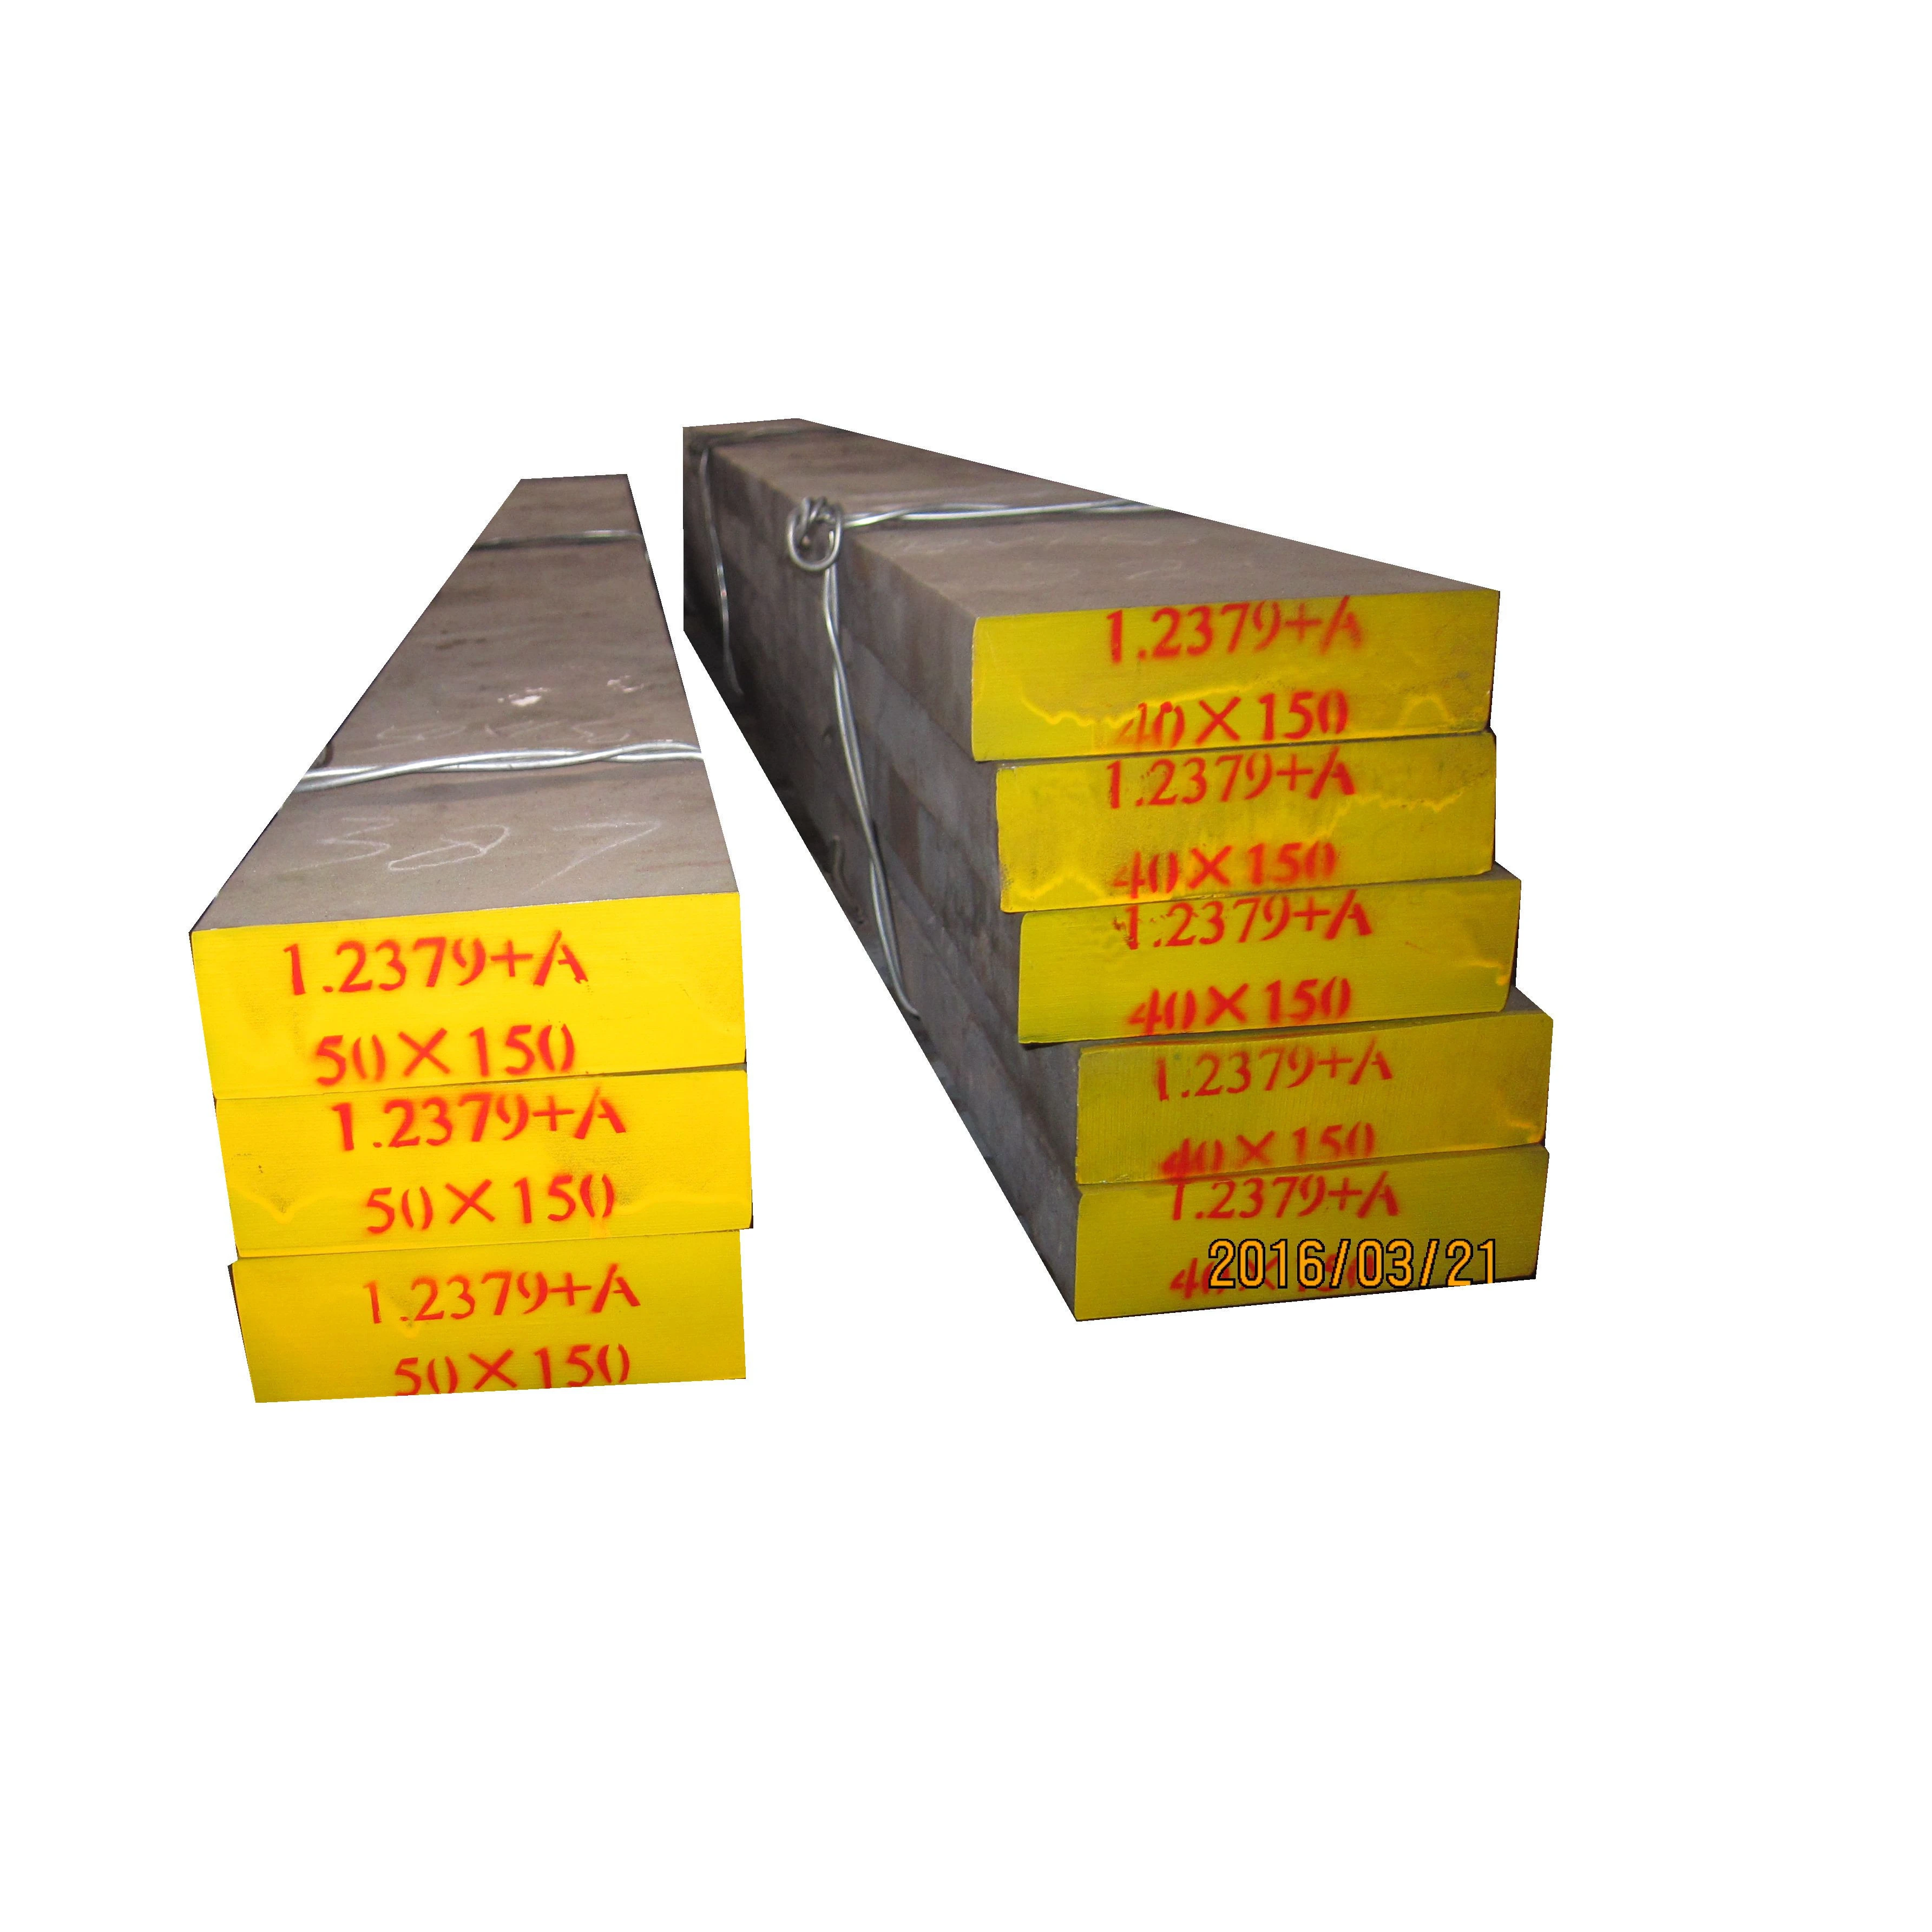 Steel Forged Round Bar TG AISI D2/DIN 1.2379/SKD11 Forged Tool Die Steel Round Bar Annealed Peeled Surface Size 70 Mm-700mm